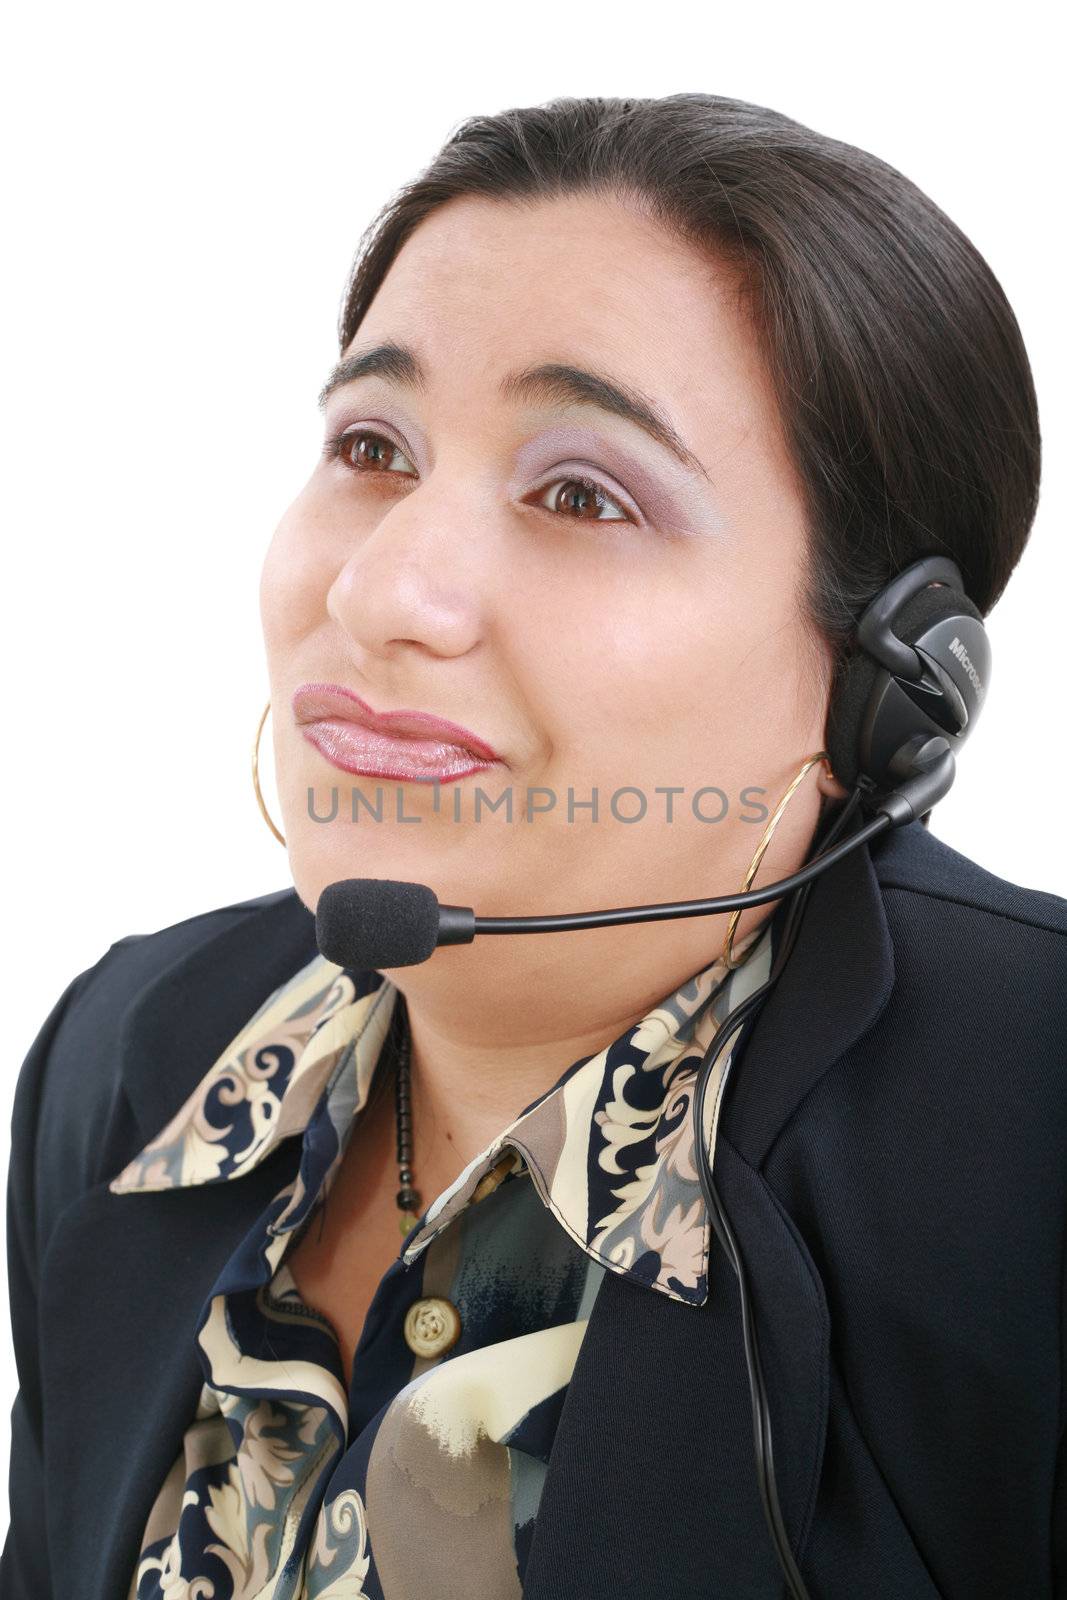 Bored customer service operator on a white background by dacasdo